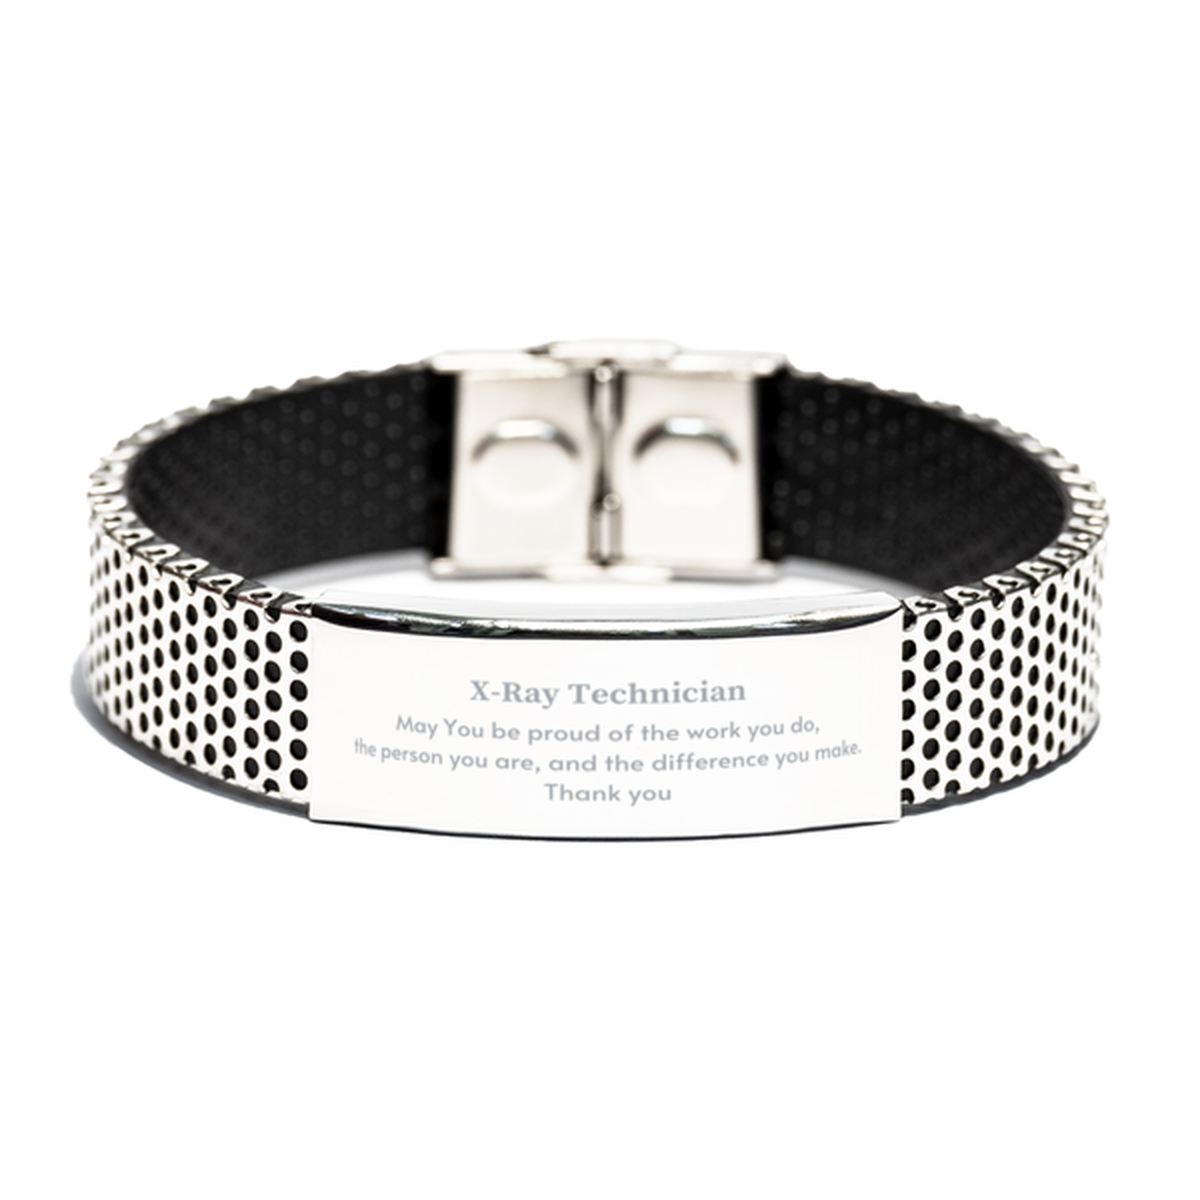 Heartwarming Stainless Steel Bracelet Retirement Coworkers Gifts for X-Ray Technician, X-Ray Technician May You be proud of the work you do, the person you are Gifts for Boss Men Women Friends